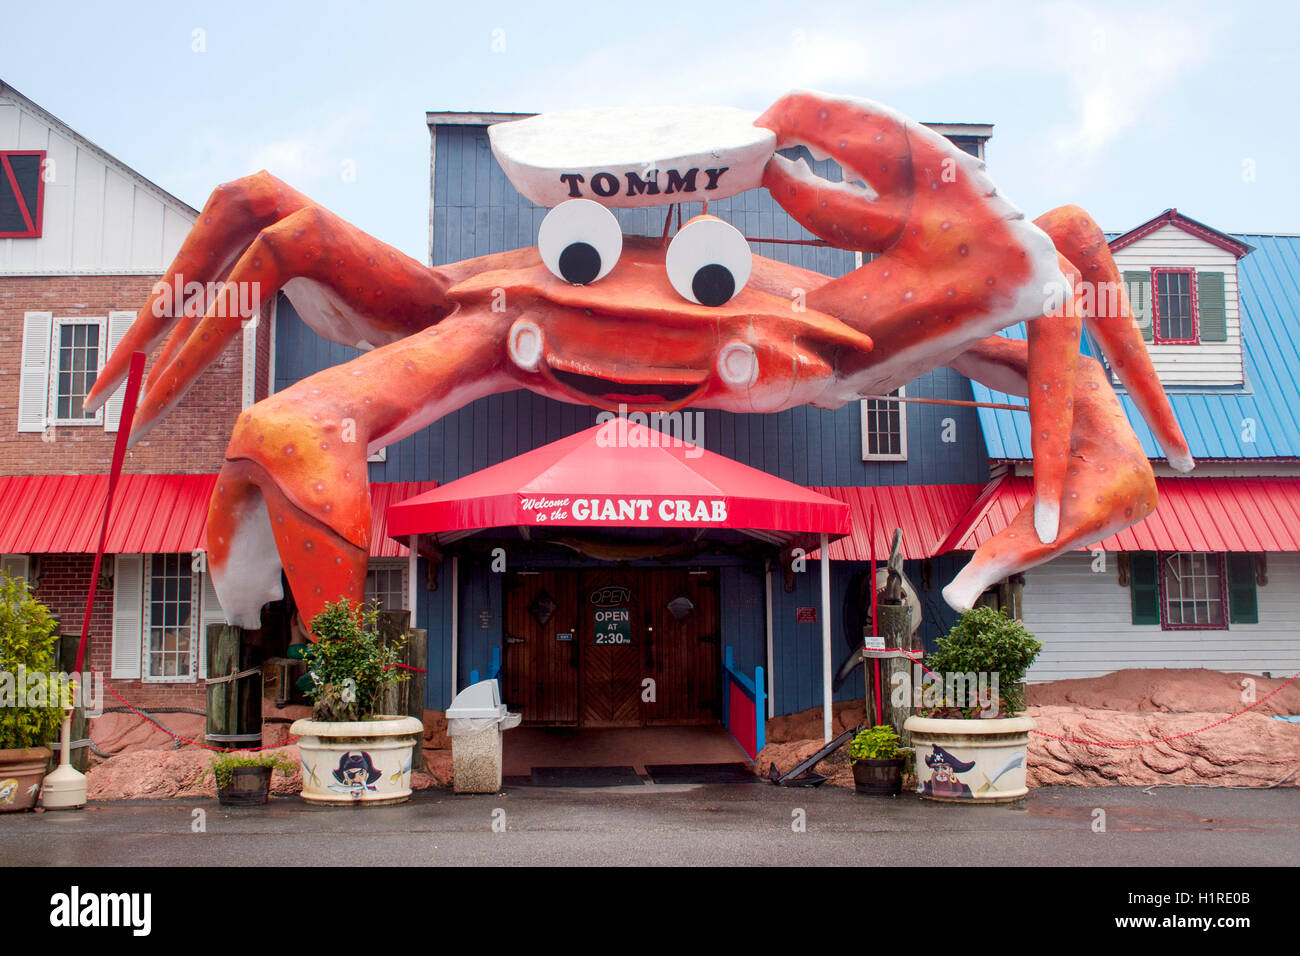 Giant Crab at Tommys restaurant in Myrtle Beach South Carolina Stock Photo